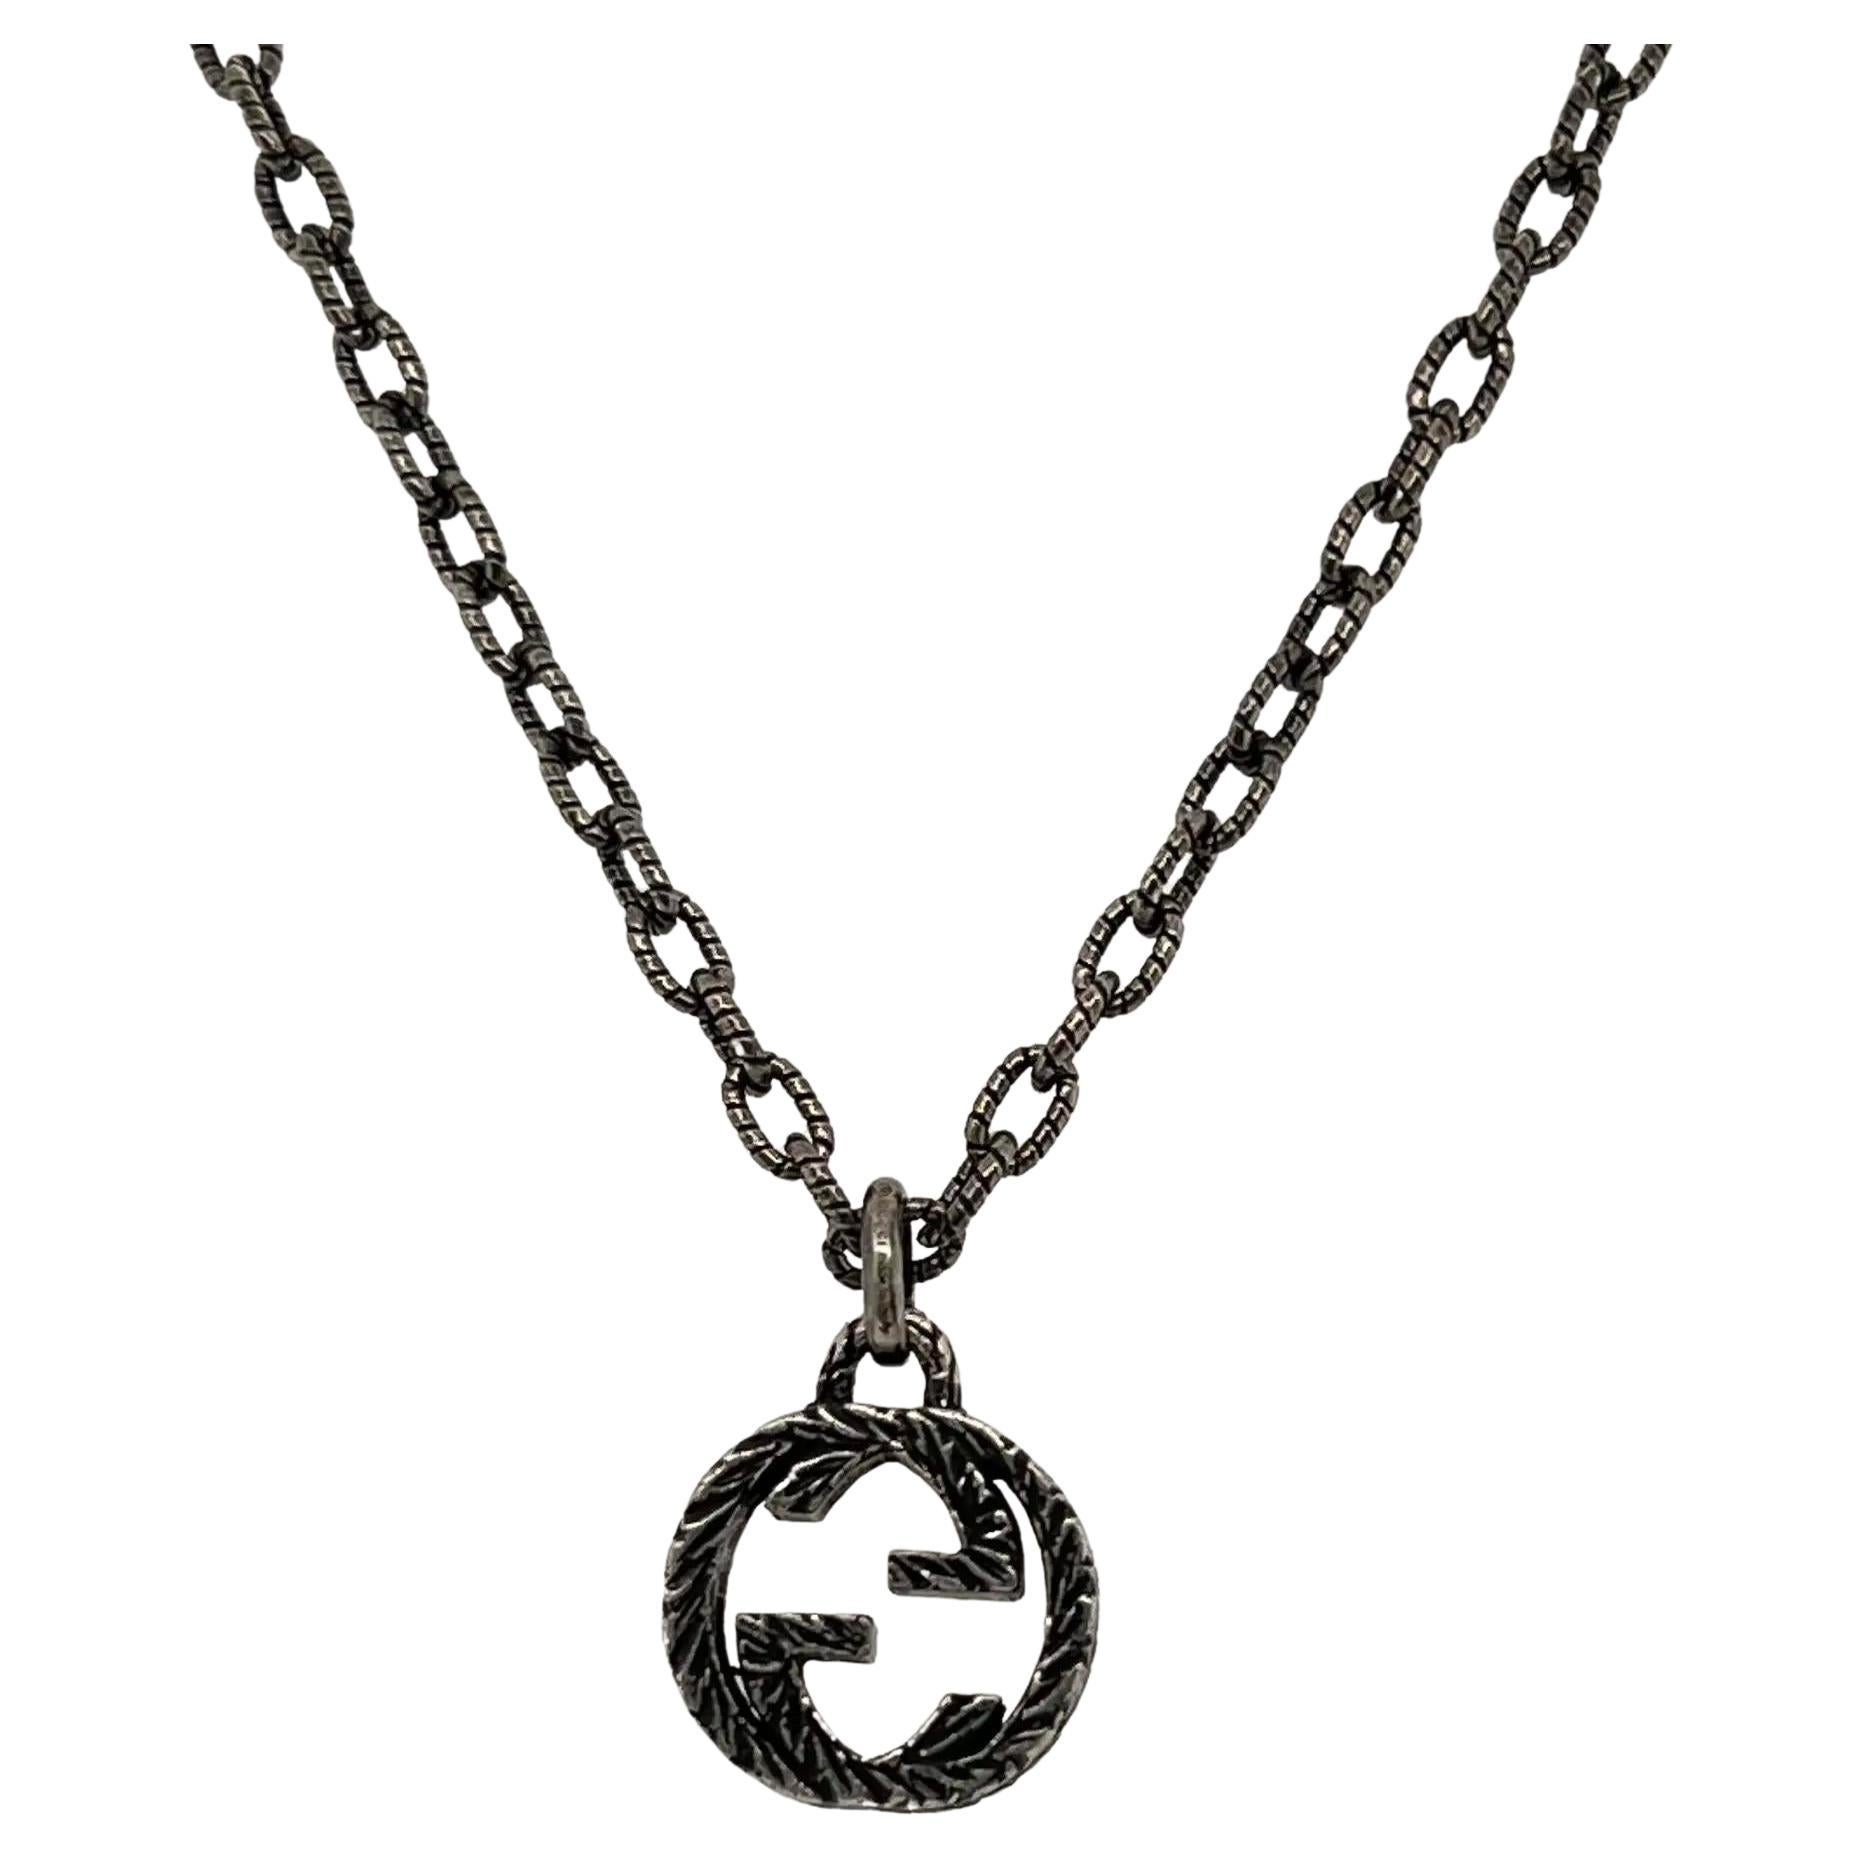 Gucci Interlocking G Pendant Necklace 925 Sterling Silver For Sale